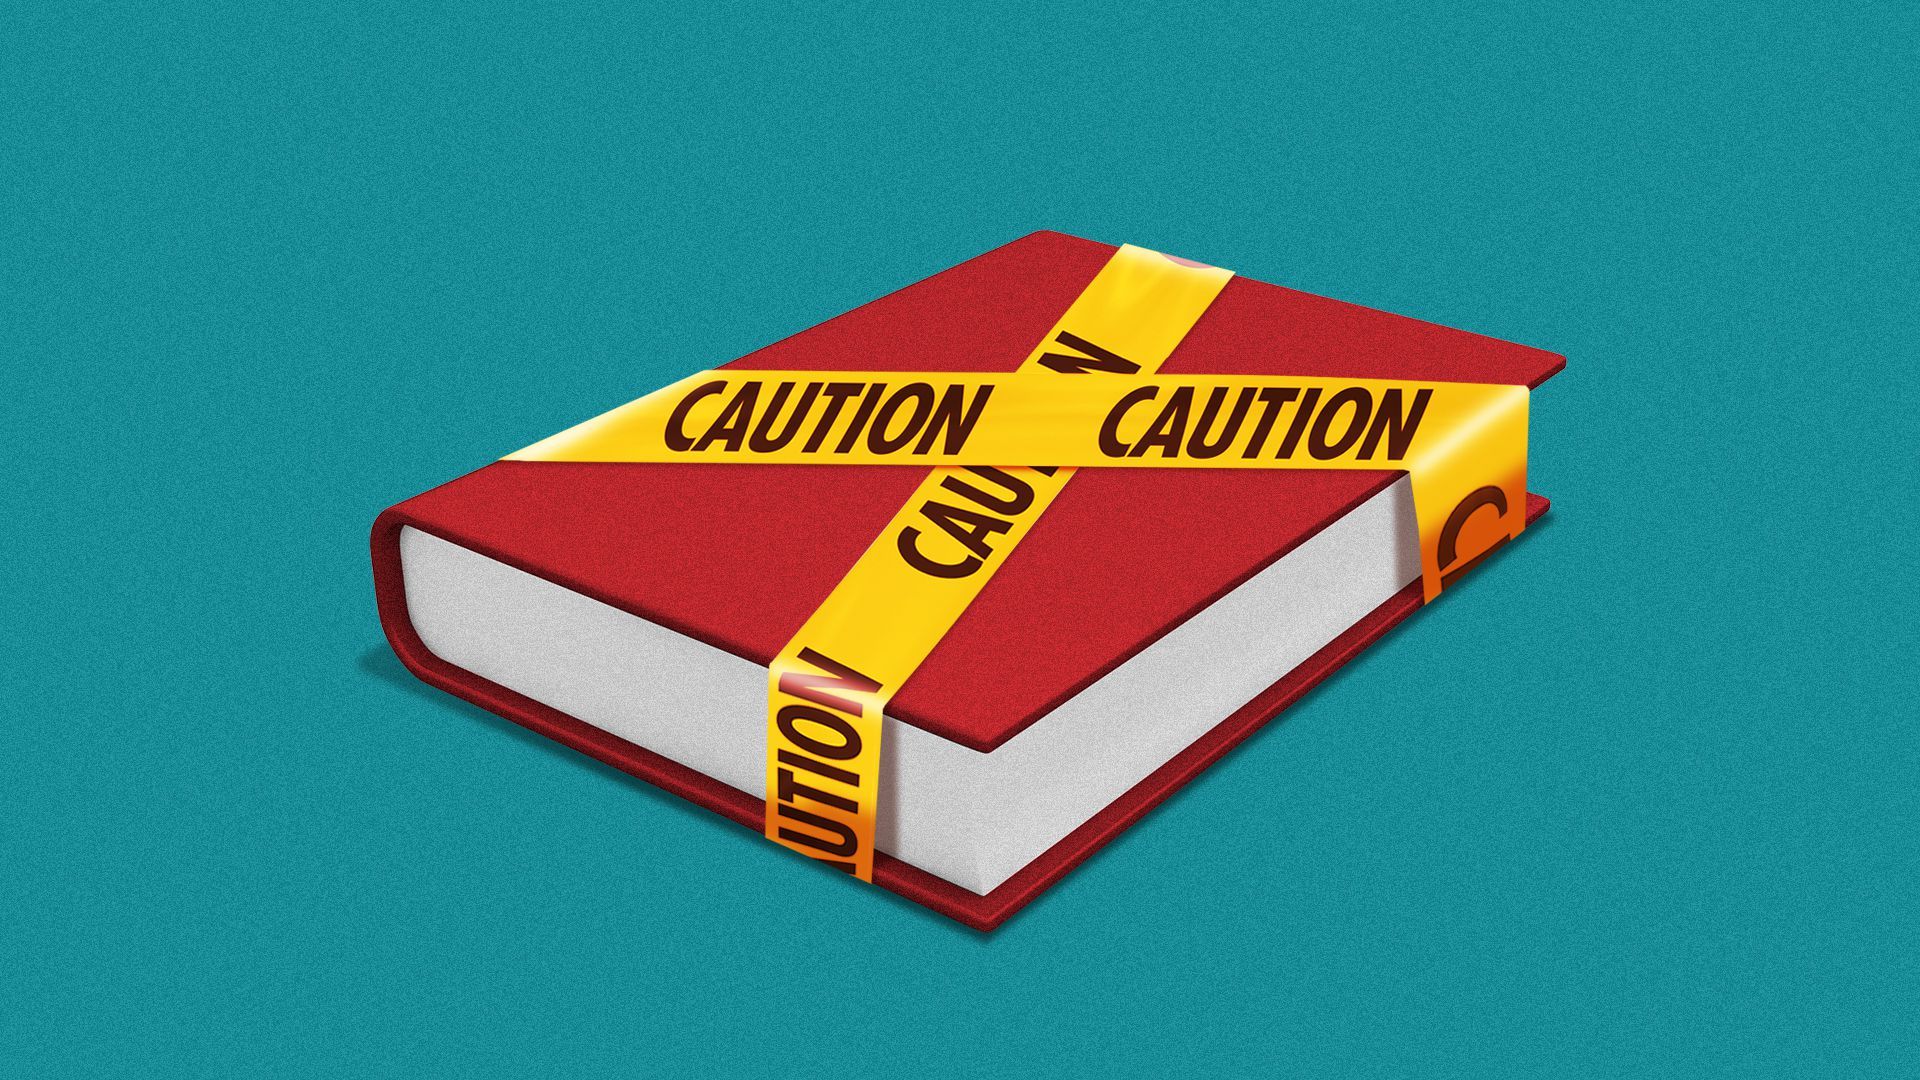 Illustration of a book wrapped in caution tape